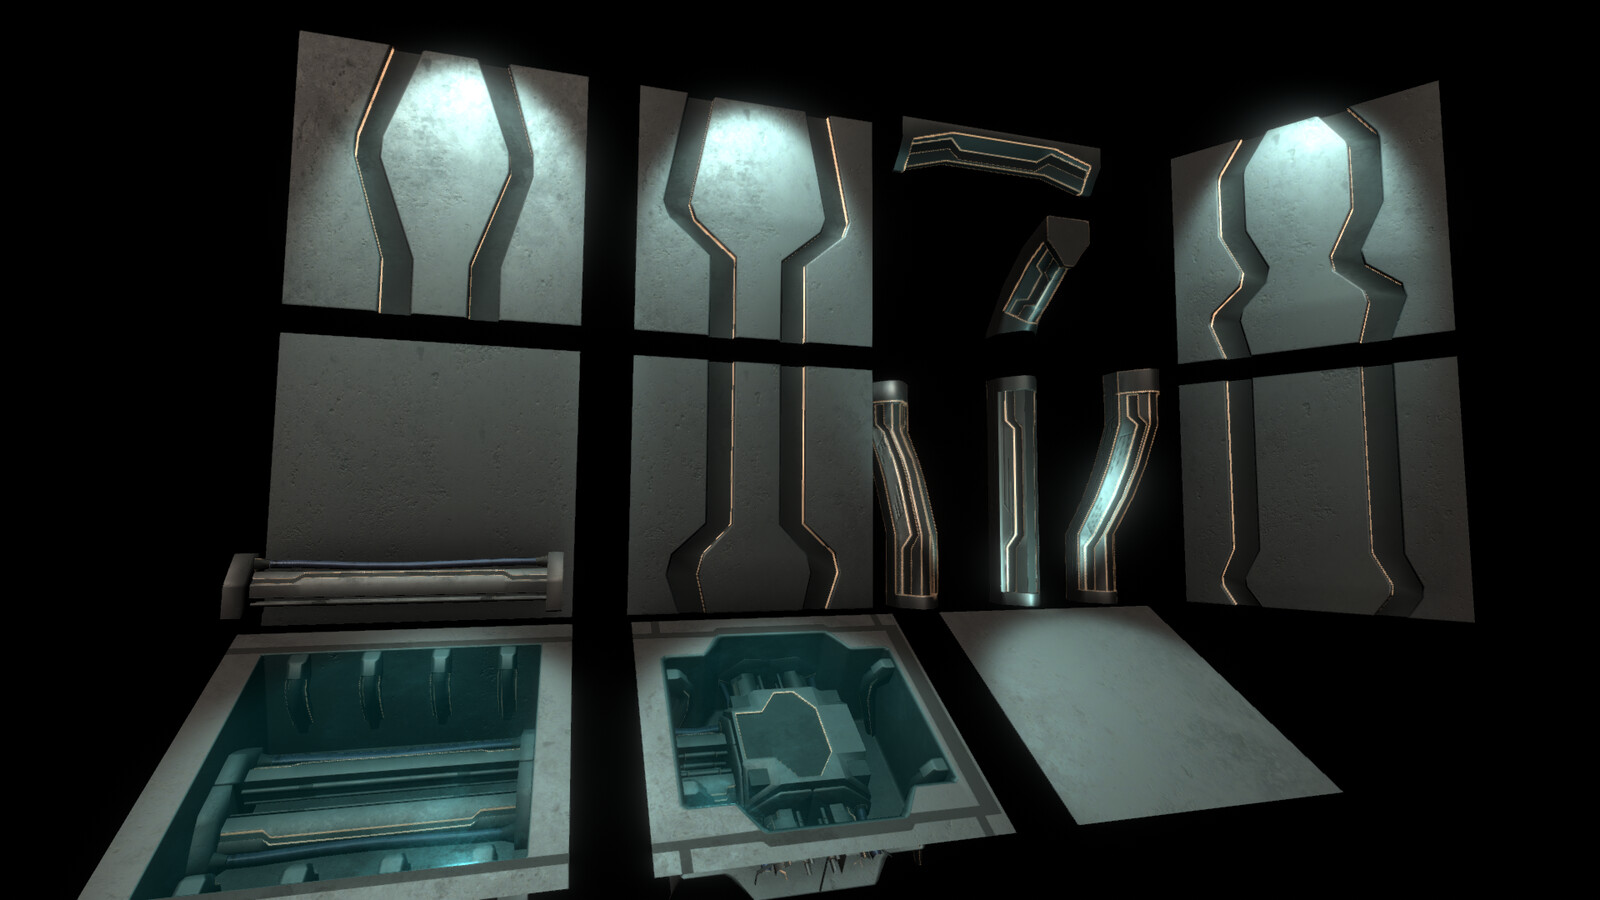 This image shows most of my environmental pieces sectioned out.
In Unity.